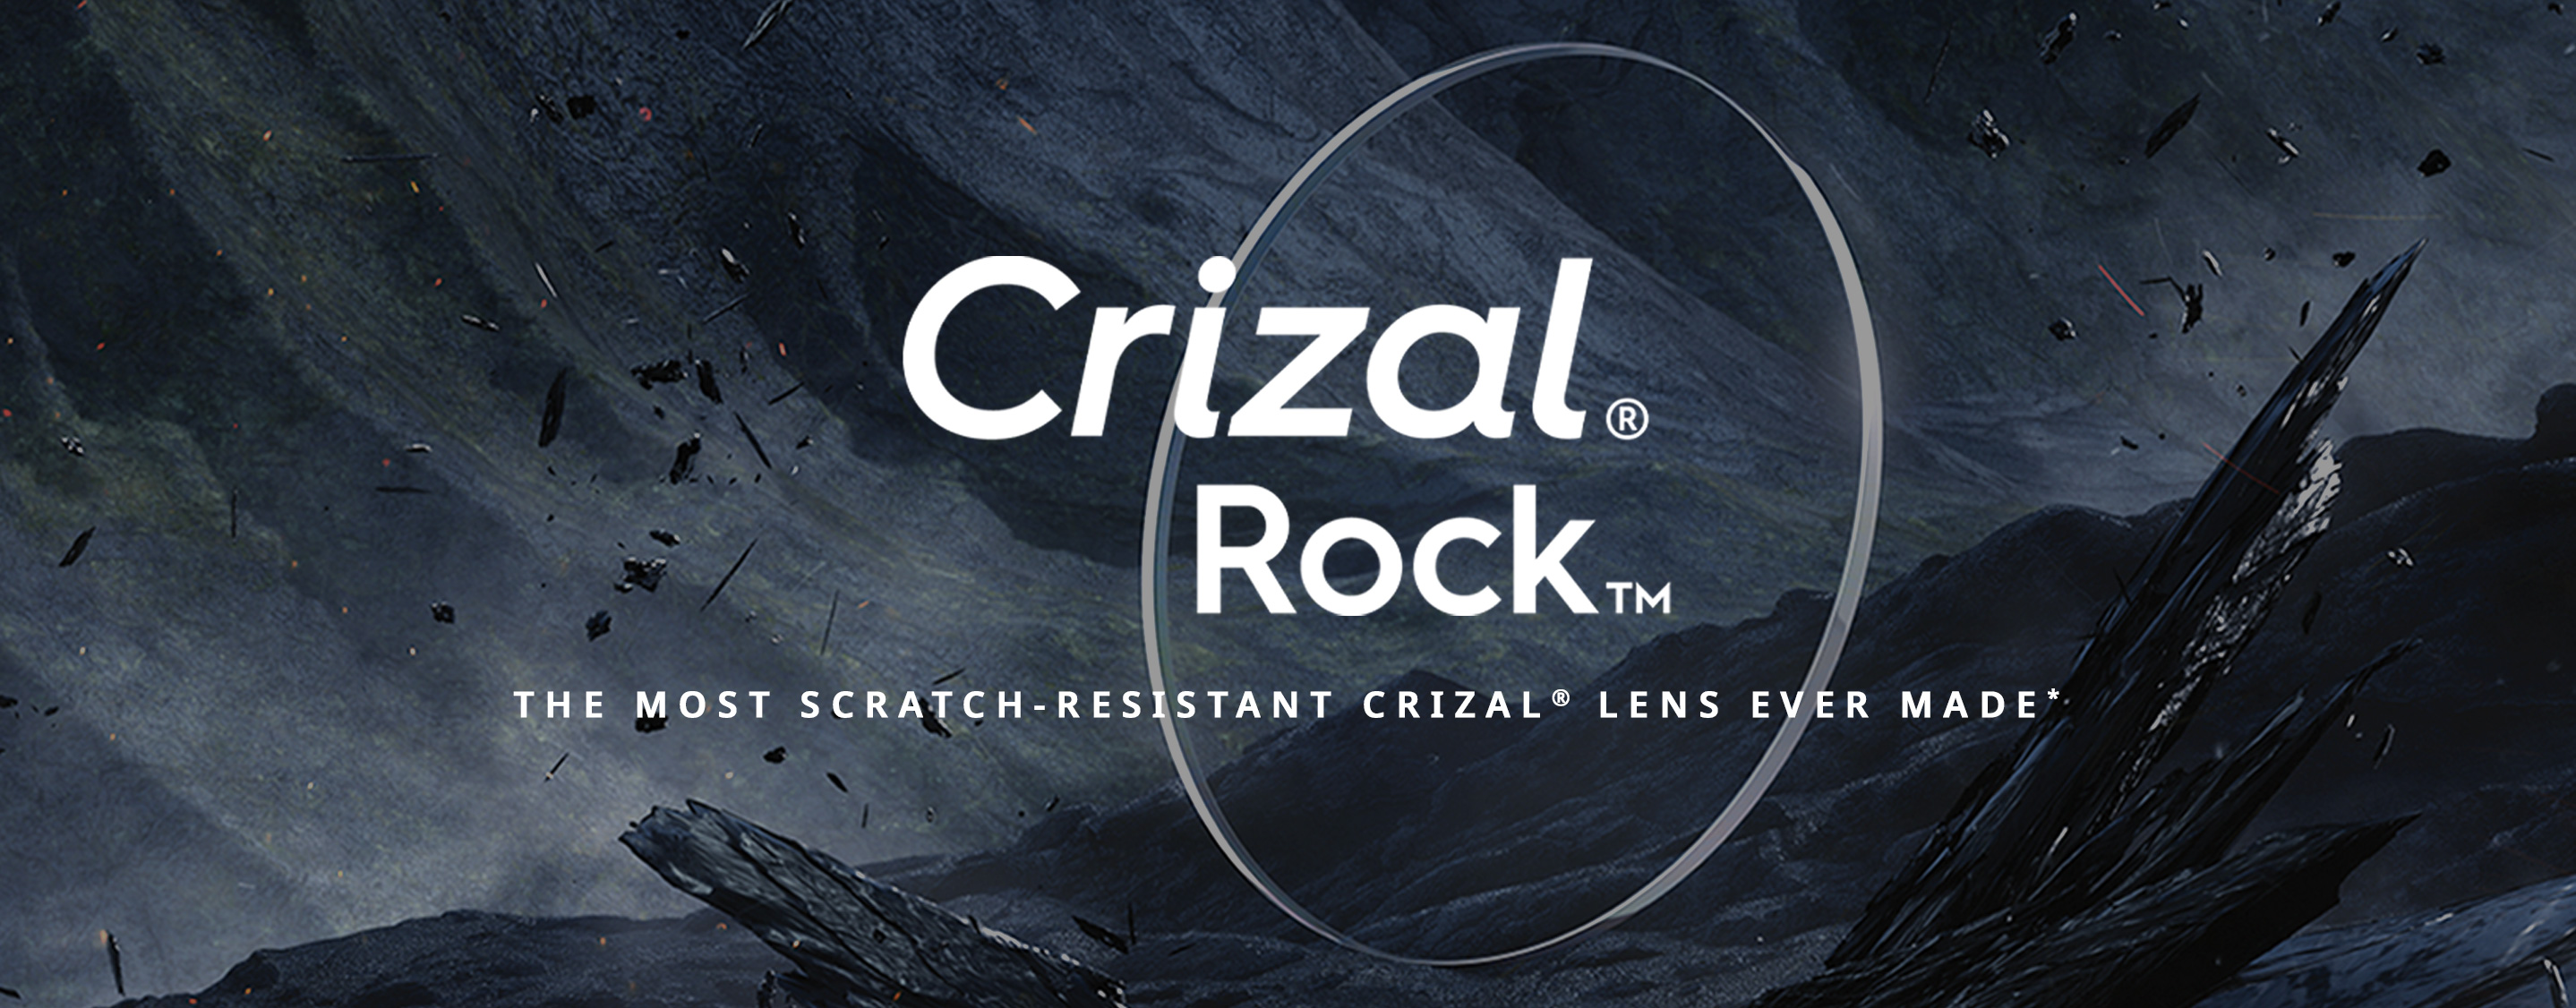 Crizal Rock logo - the most scratch resistant Crizal lens ever made